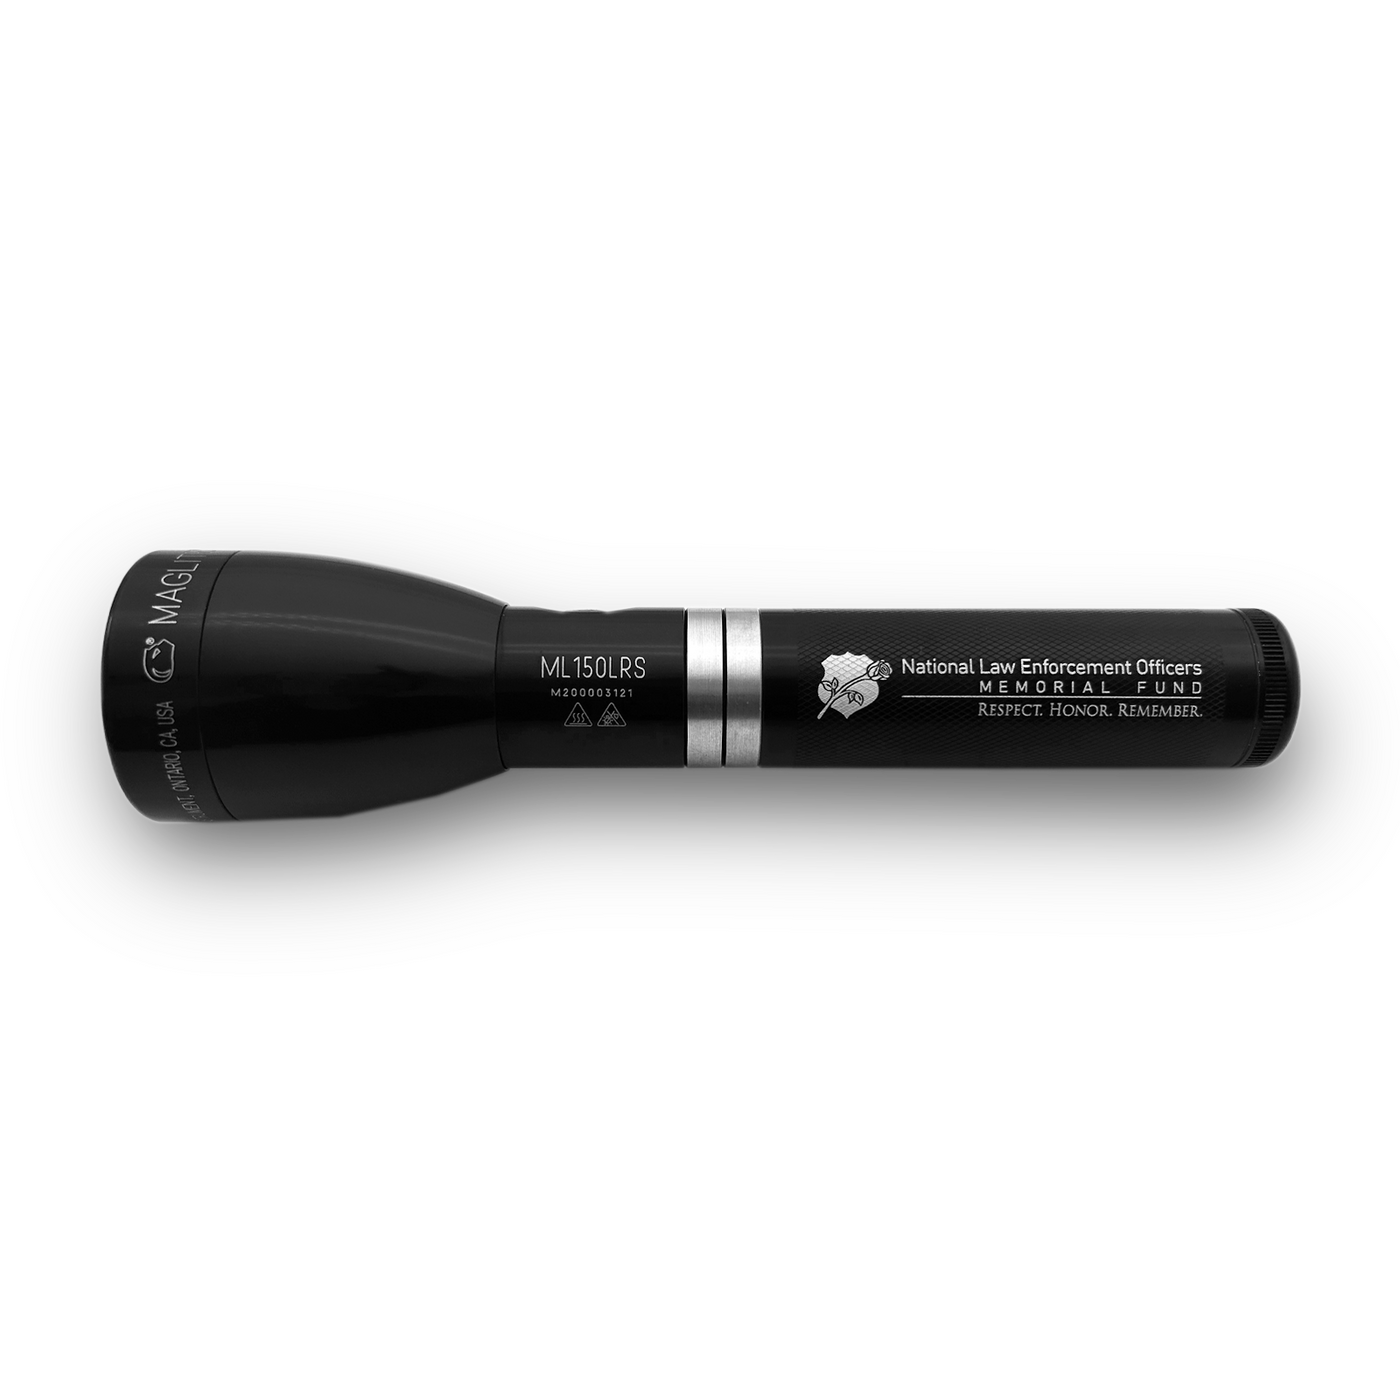 Maglite Ml150LRS LED Rechargeable Flashlight with custom NLEOMF engraving